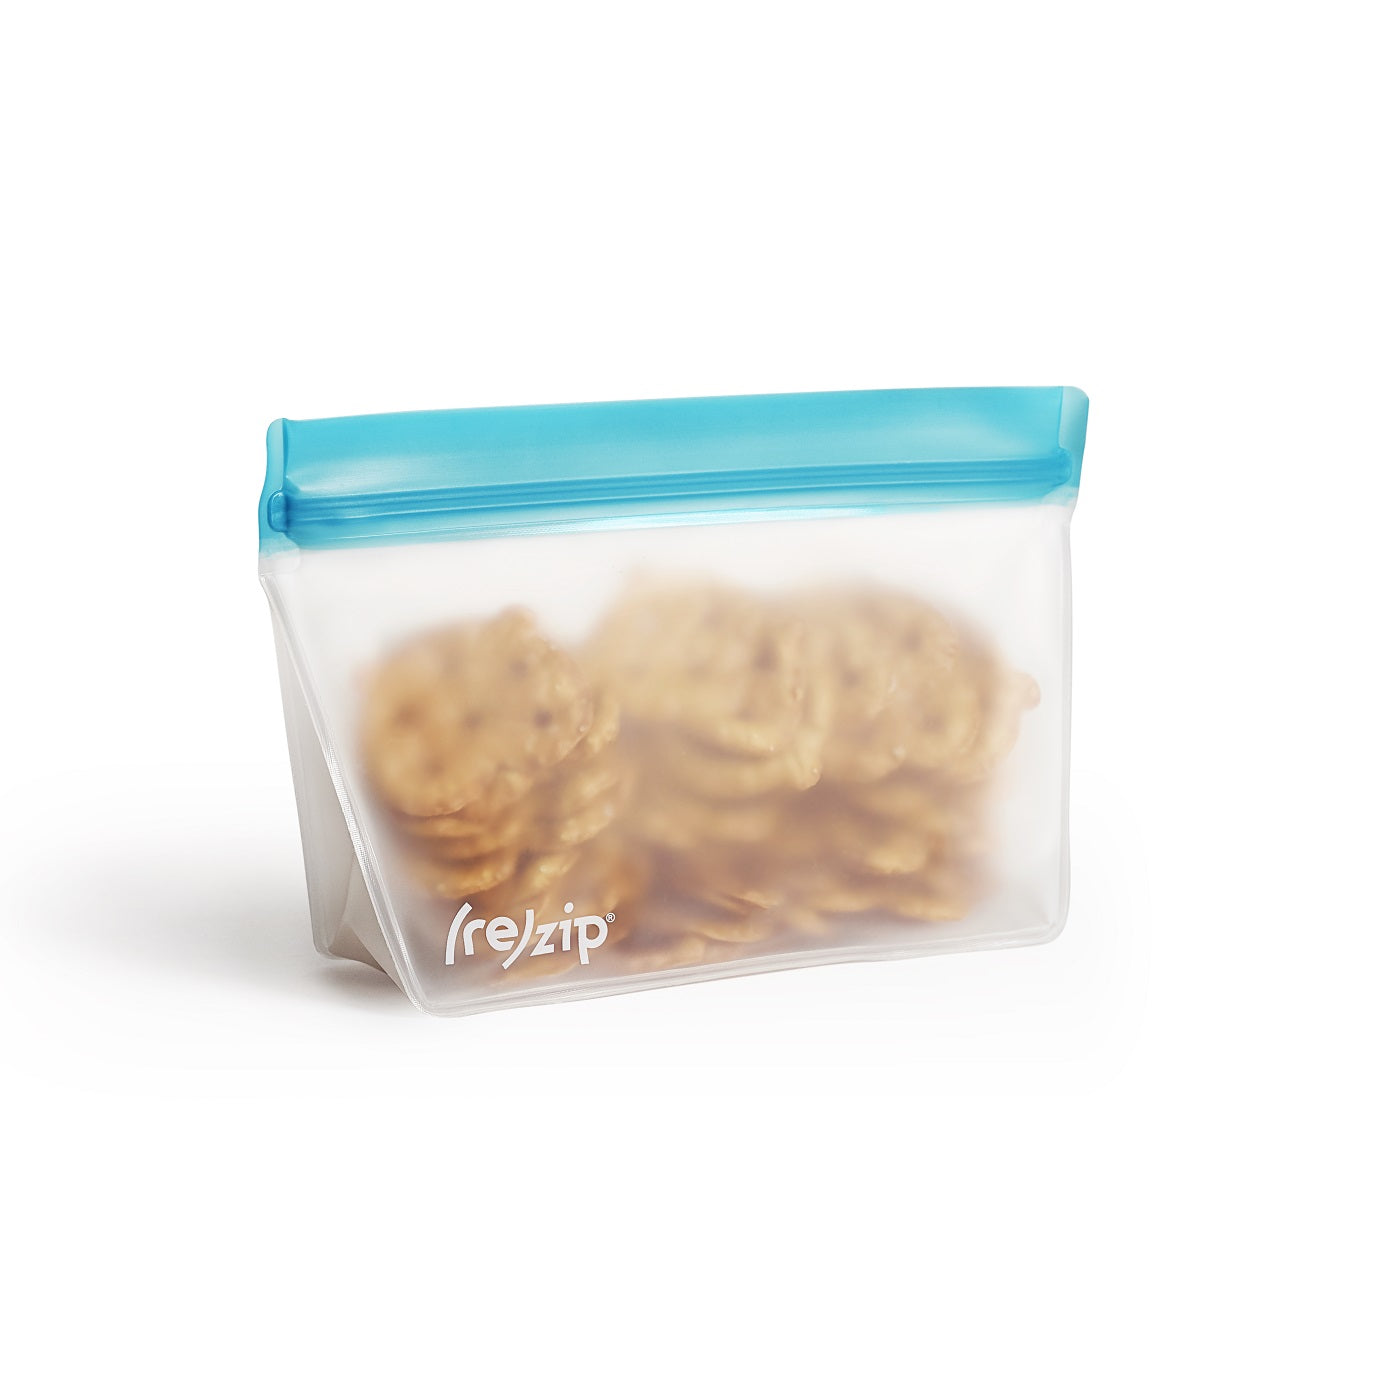 rezip Stand-Up 2 cup | 16 ounce Leakproof Reusable Food Storage Bag great for snacking